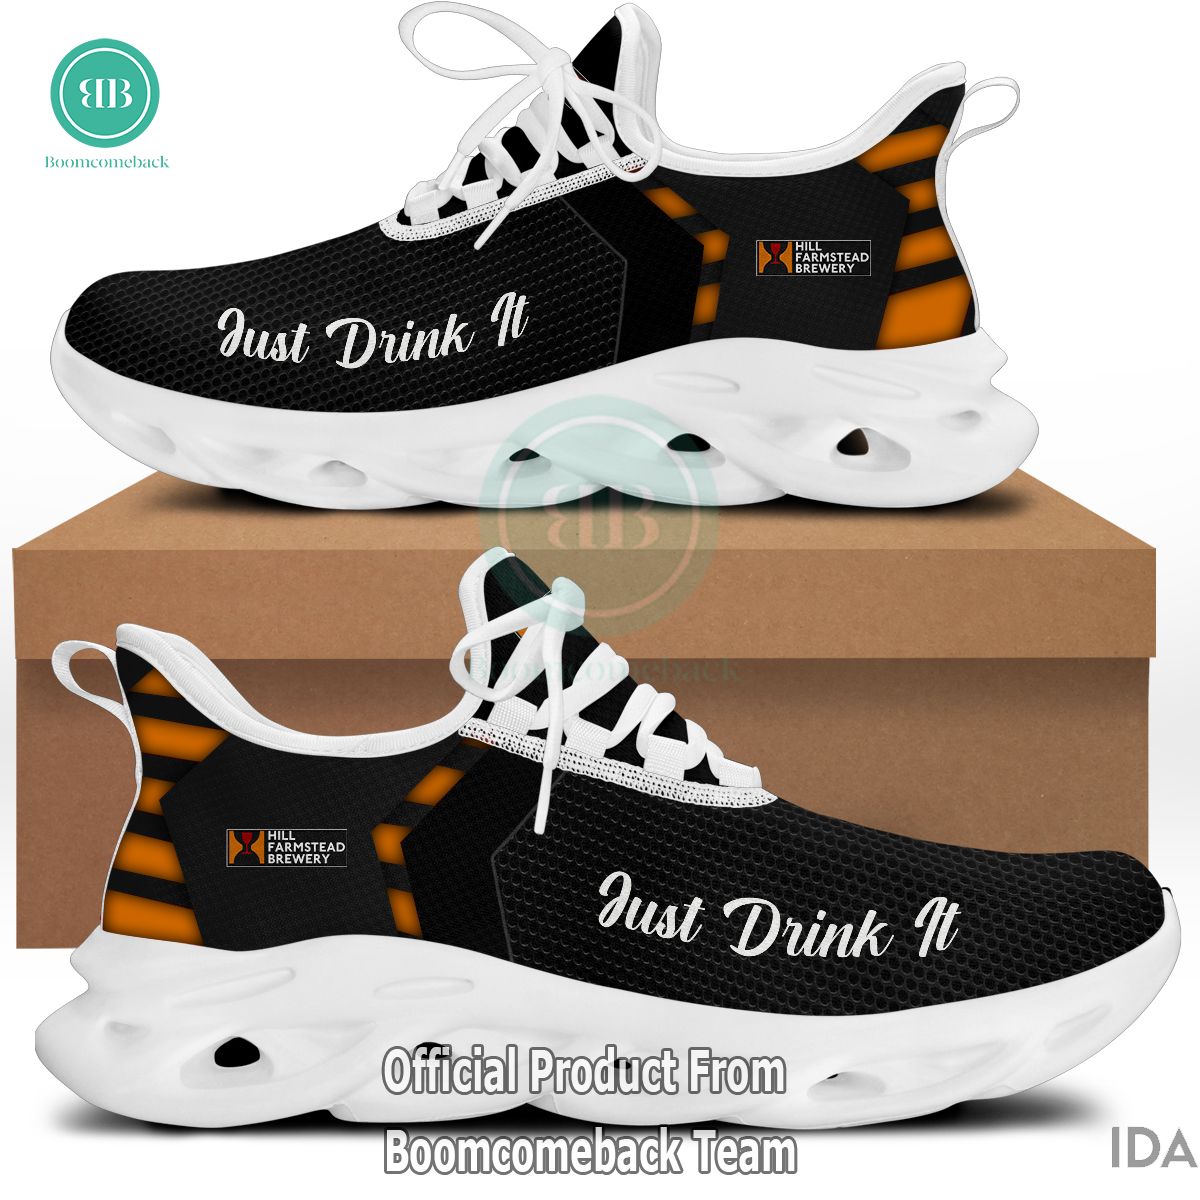 Hill Farmstead Brewery Just Drink It Max Soul Shoes